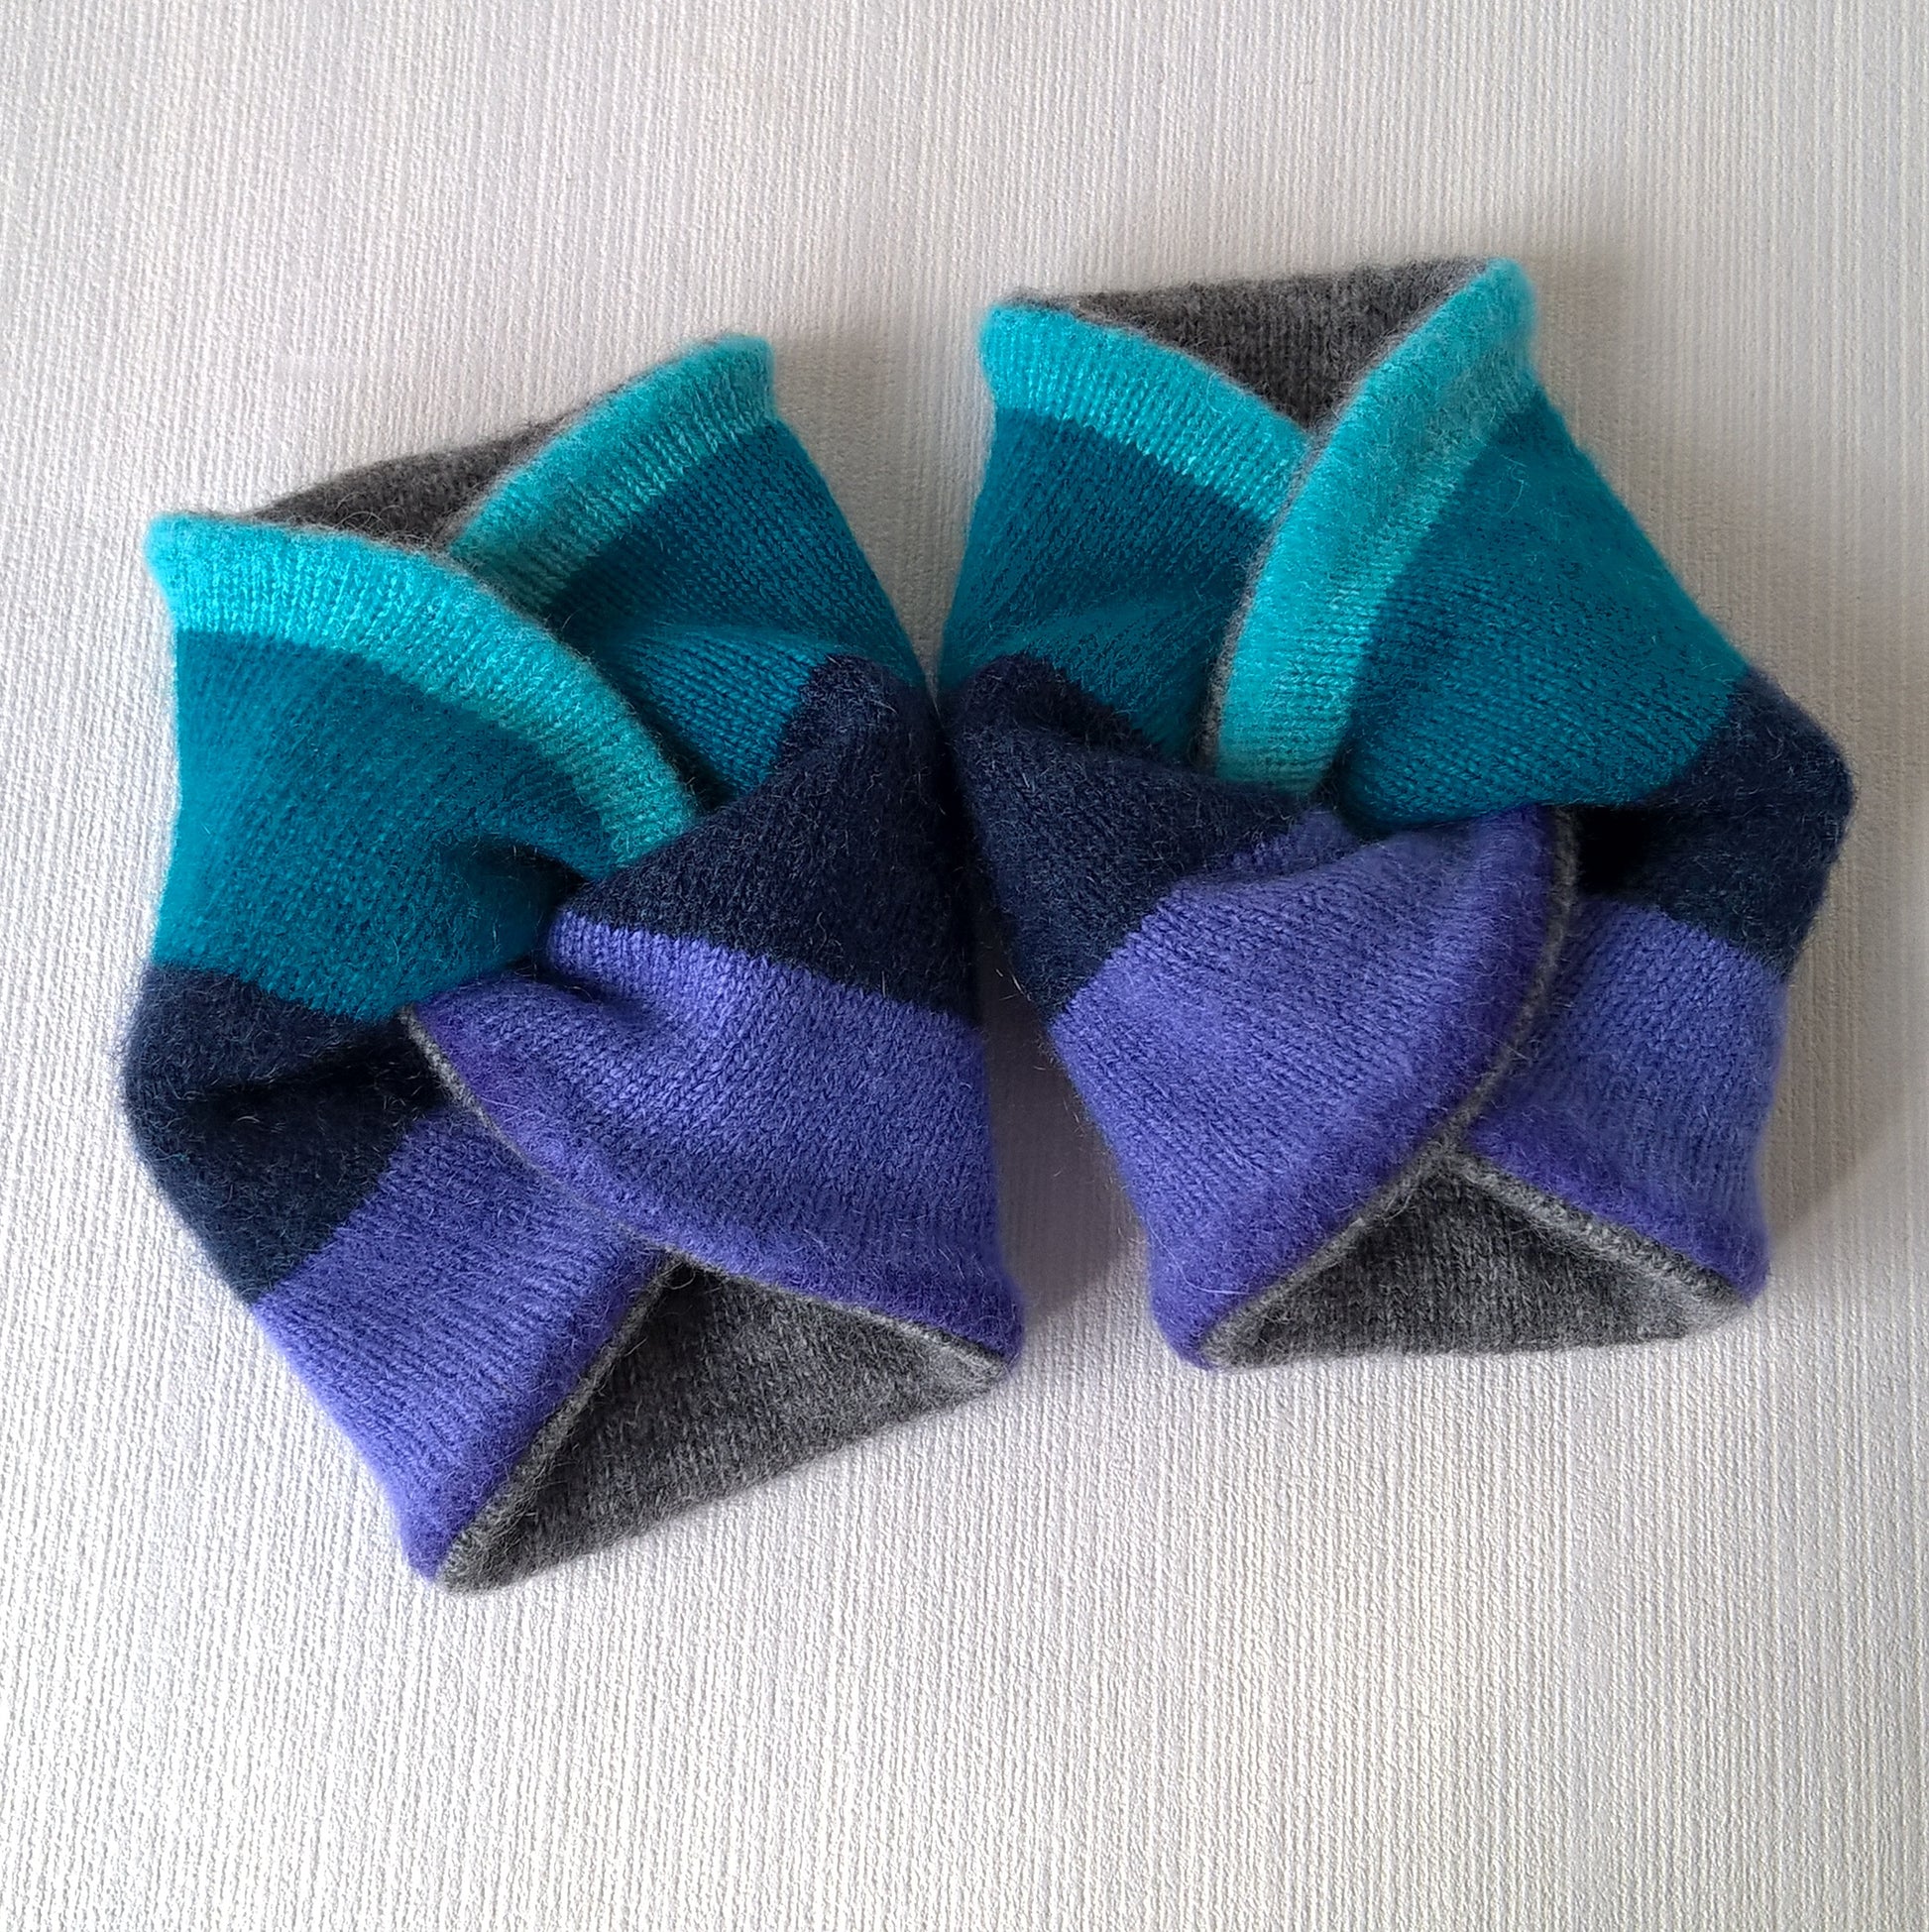 Cashmere wrist warmers in a twisted knot design